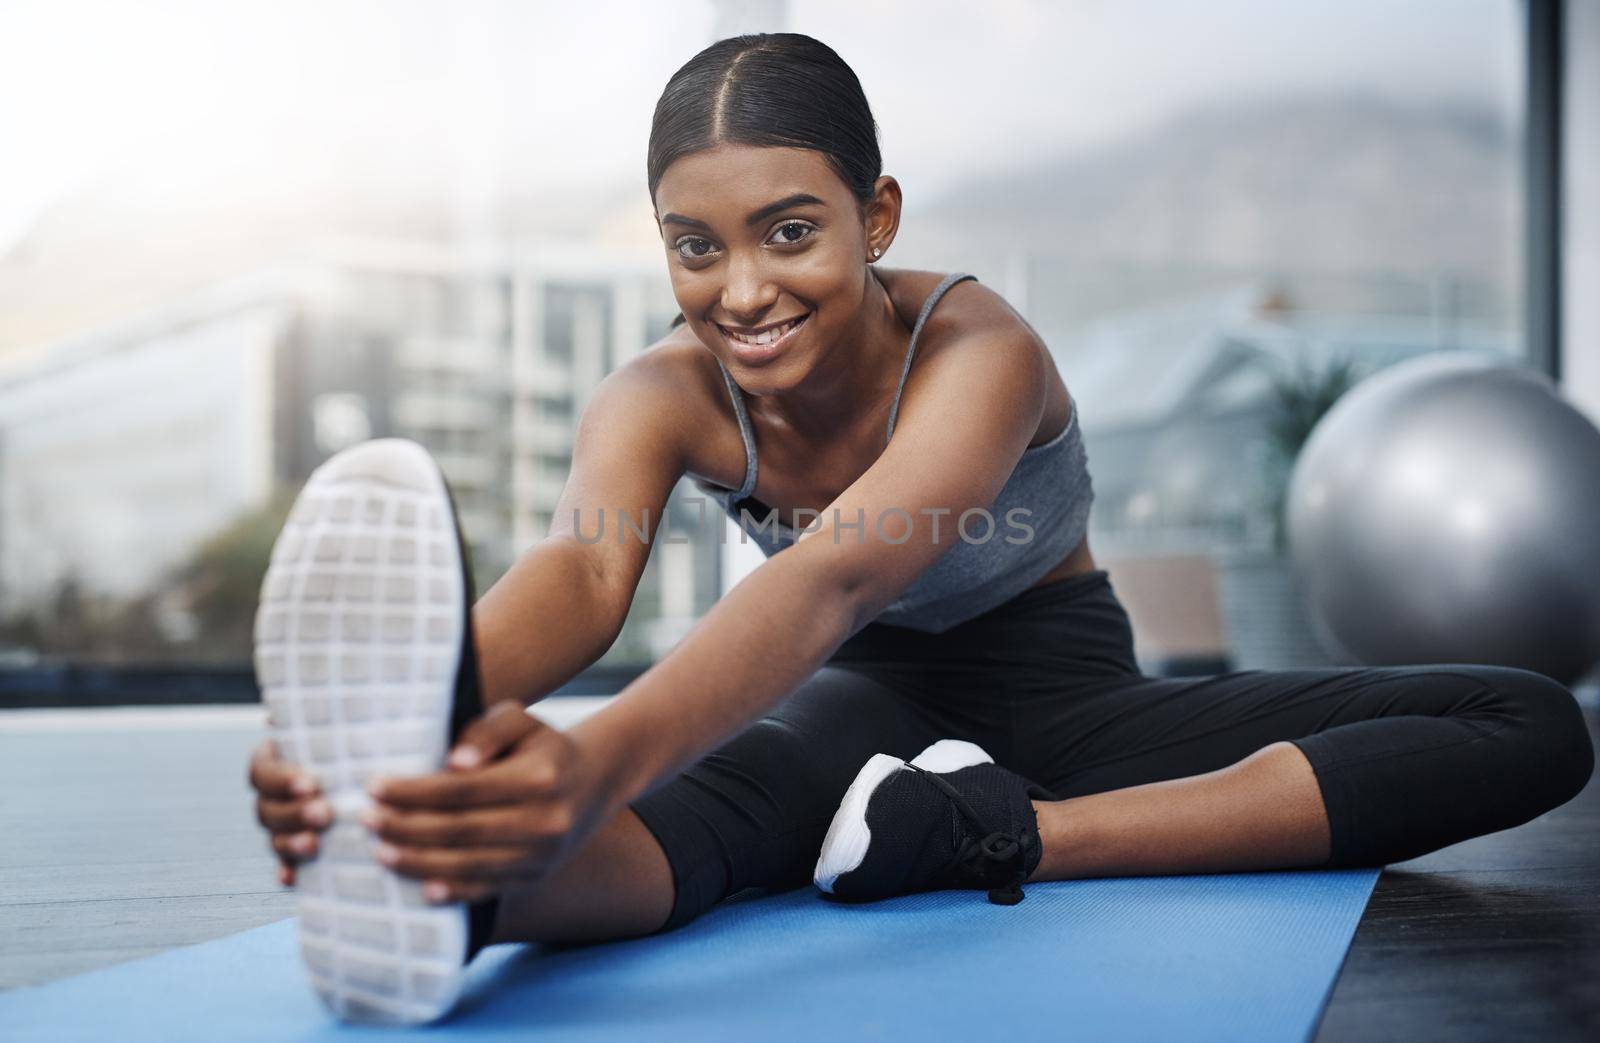 Every good workout starts with a positive attitude. a beautiful young woman smiling while sitting down and doing stretching exercises on her gym mat at home